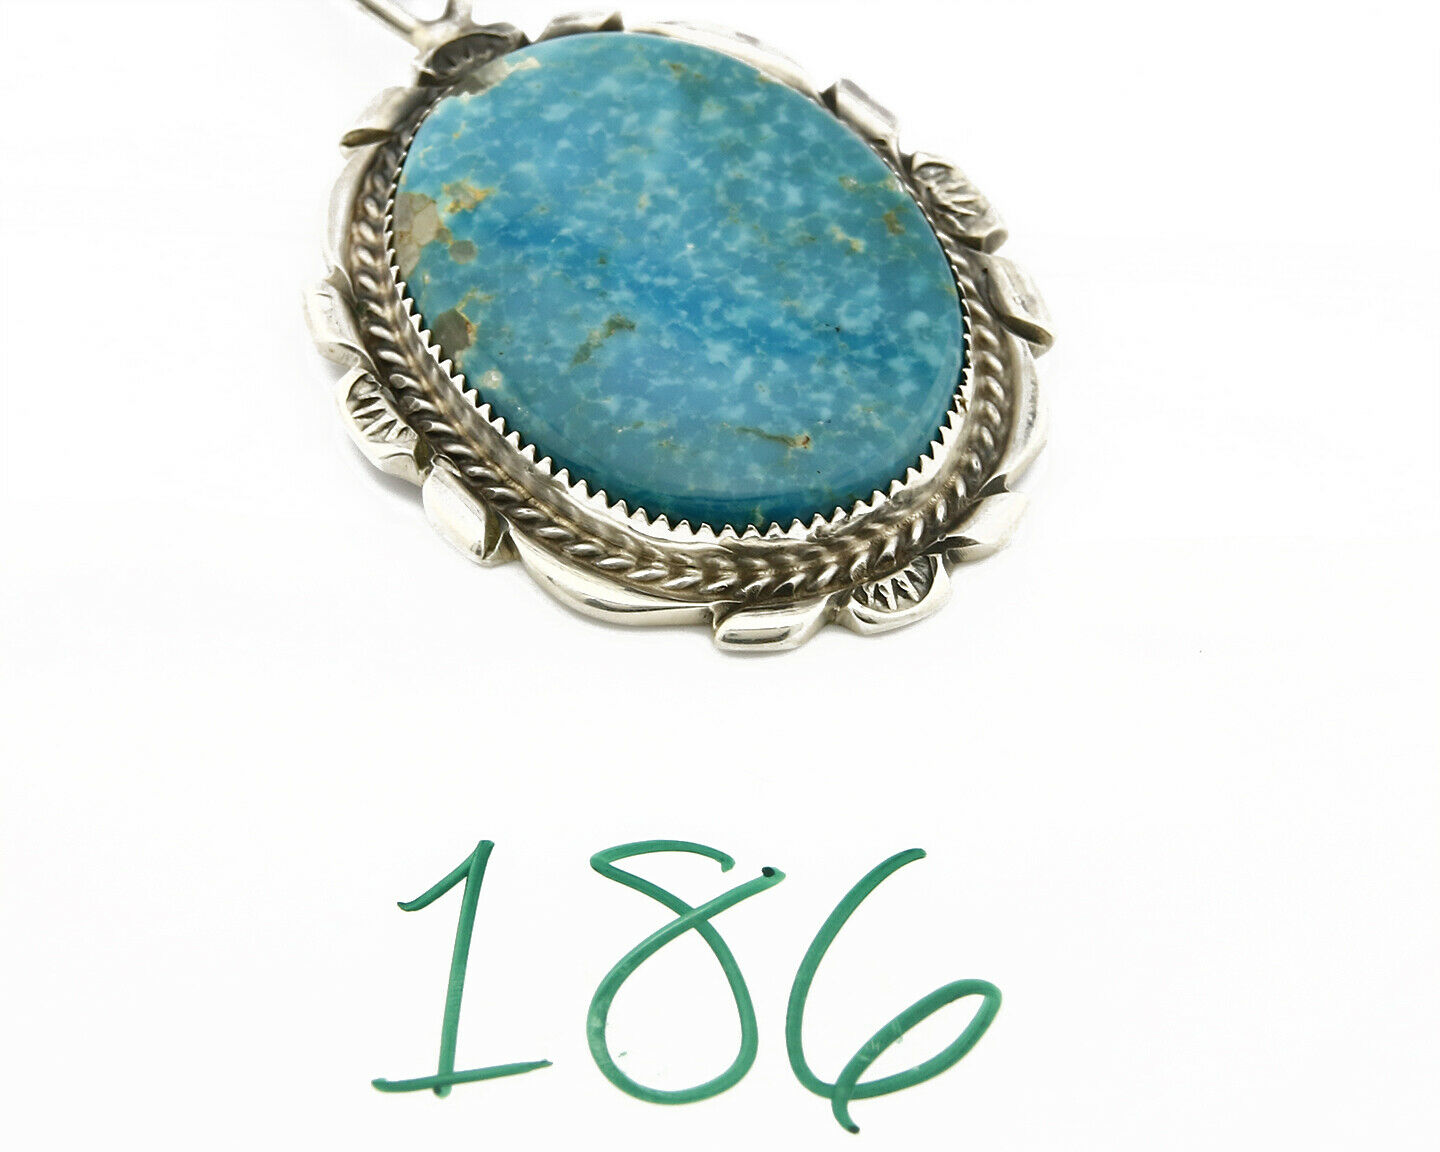 C. 80's-90 Navajo Talhat Large Natural Mined Turquoise .925 Silver Pendant